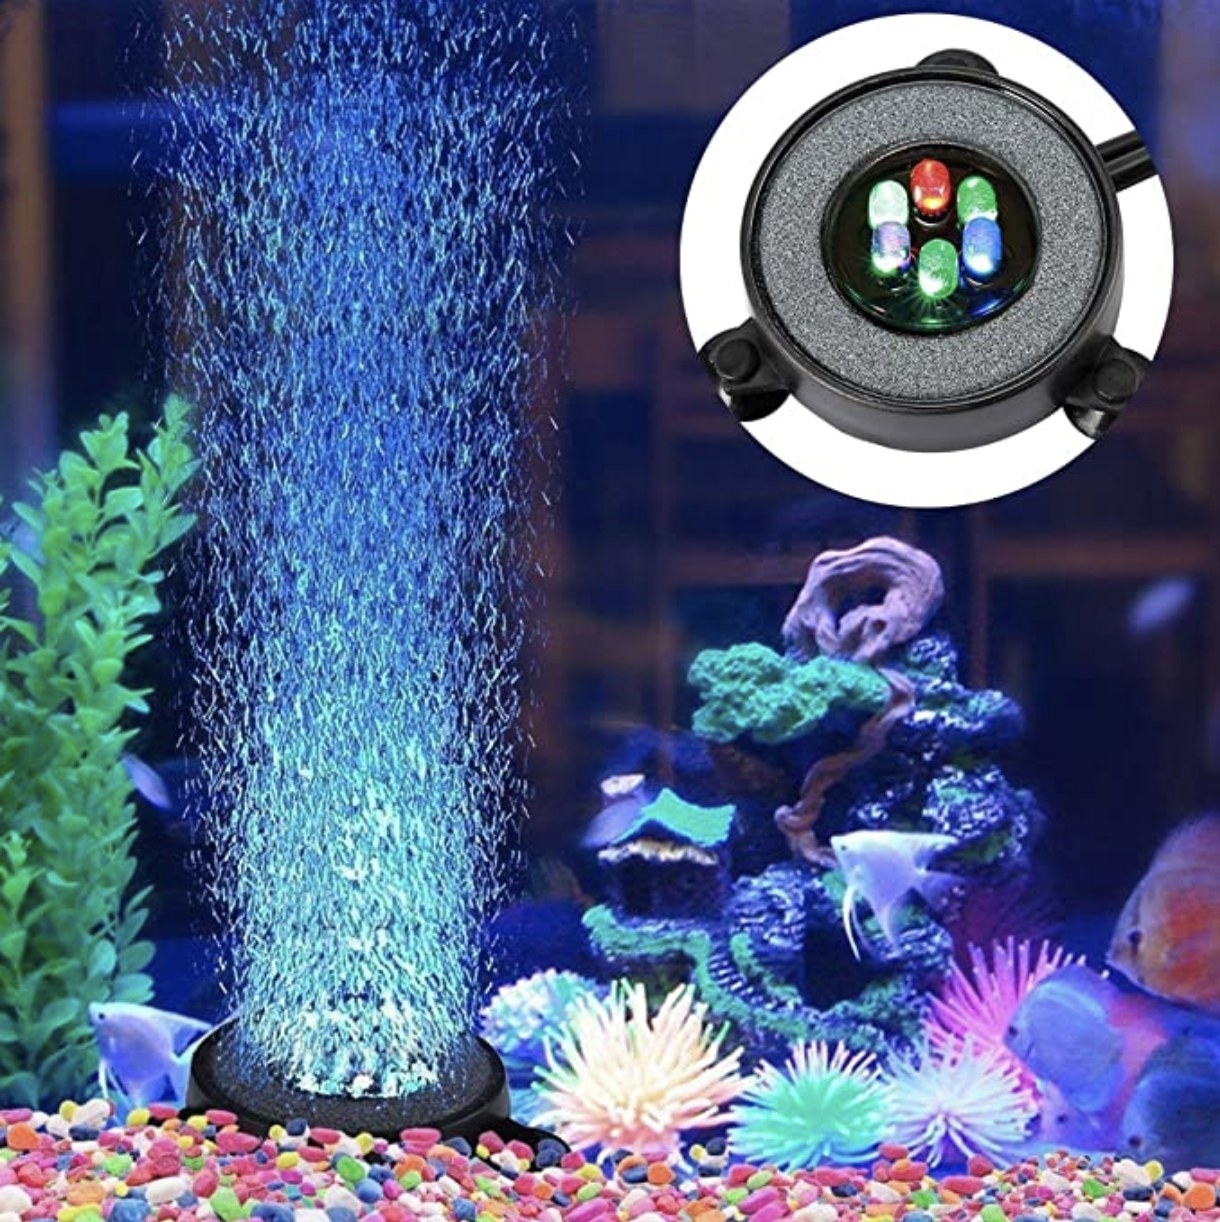 The LED bubbler shown in a fish tank 